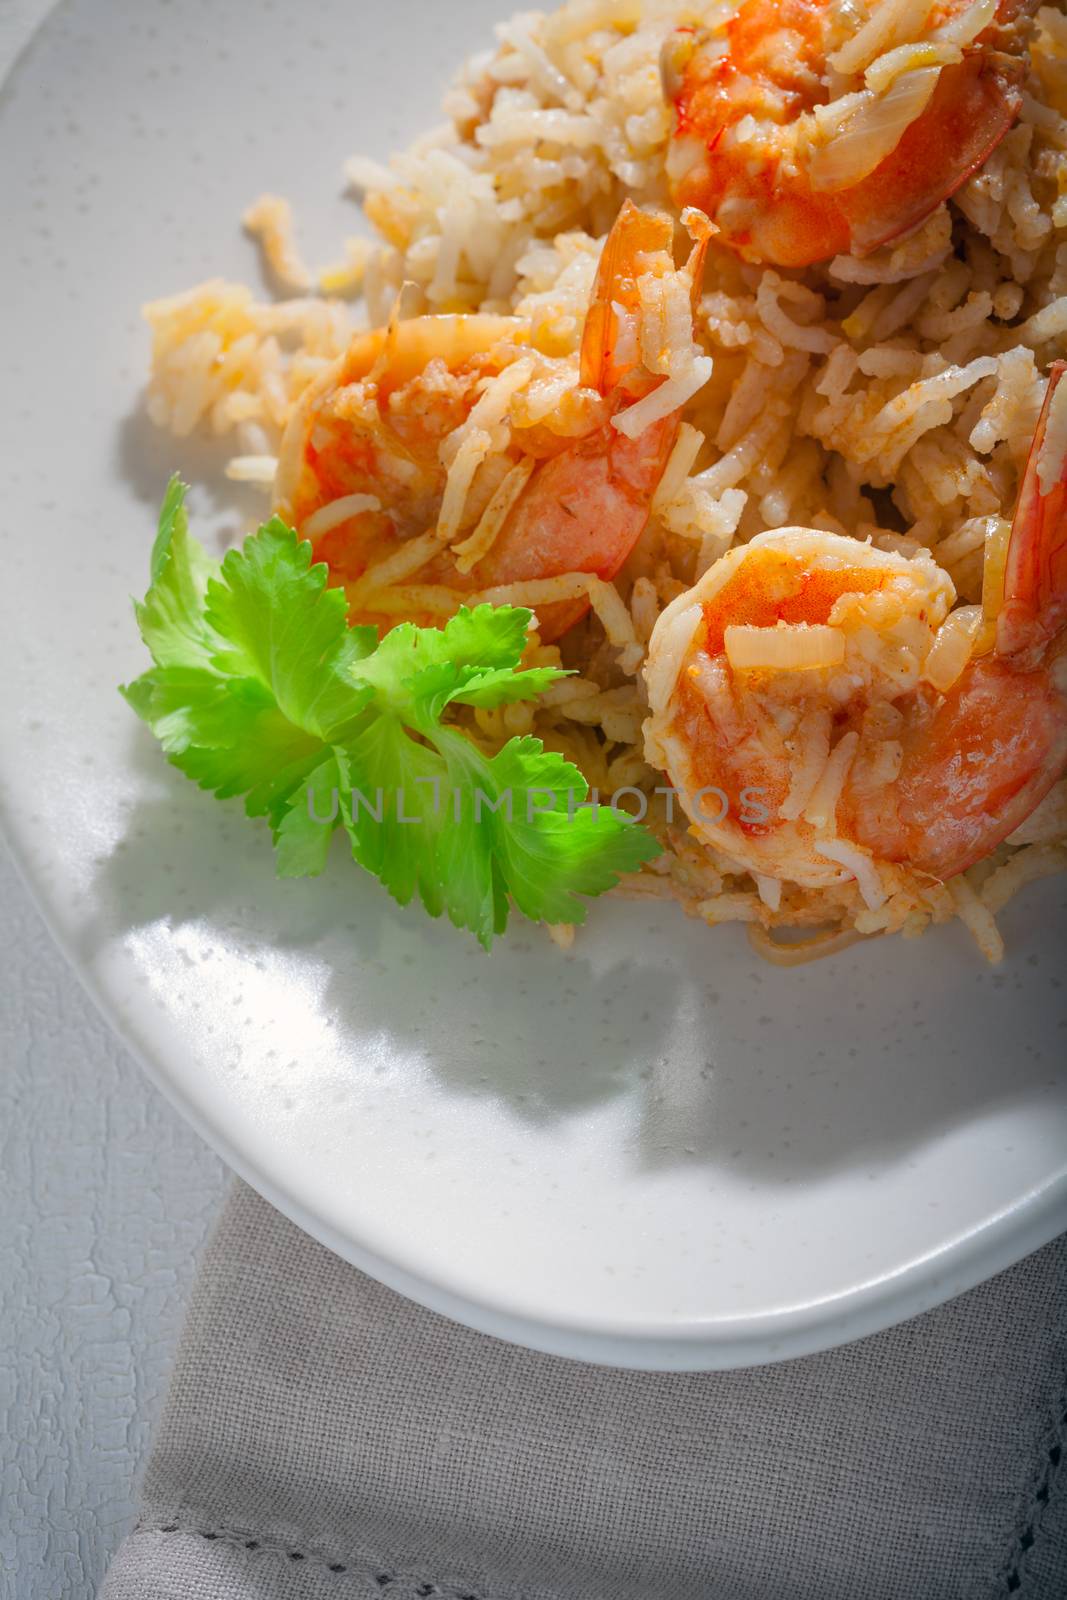 Bowl of fried rice with shrimps and greenery